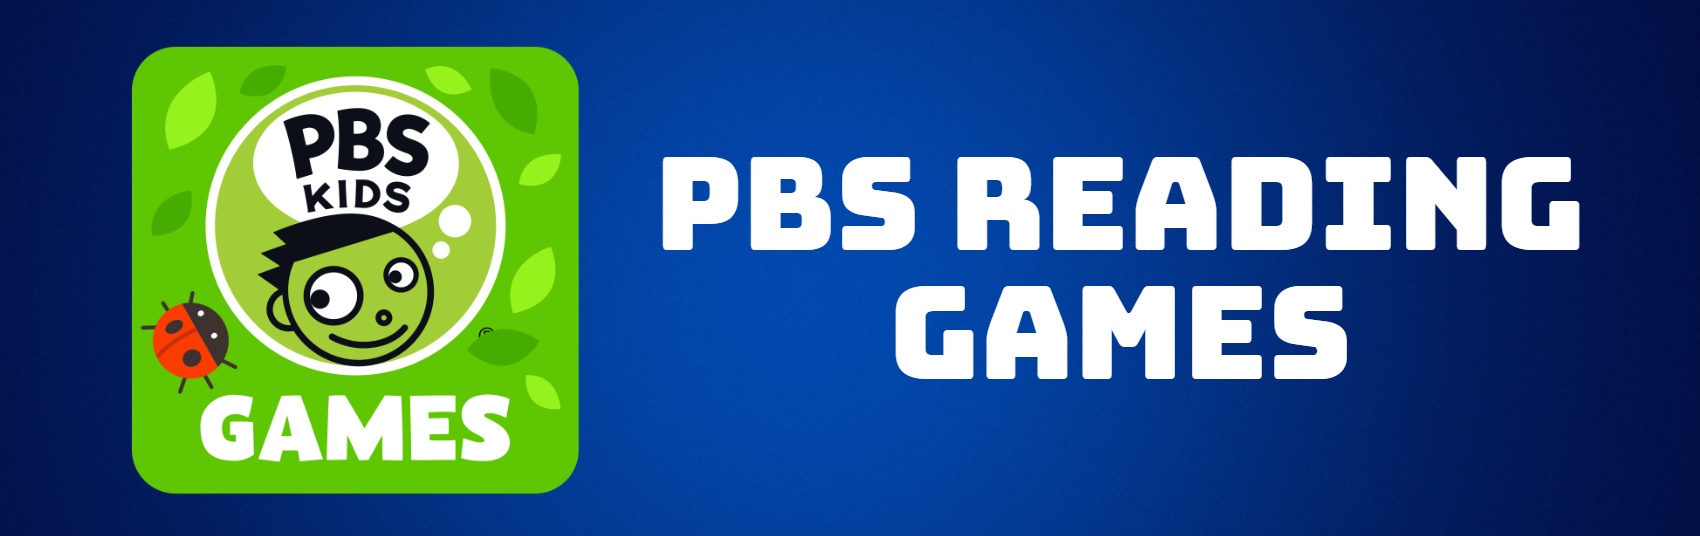 PBS READING GAMES